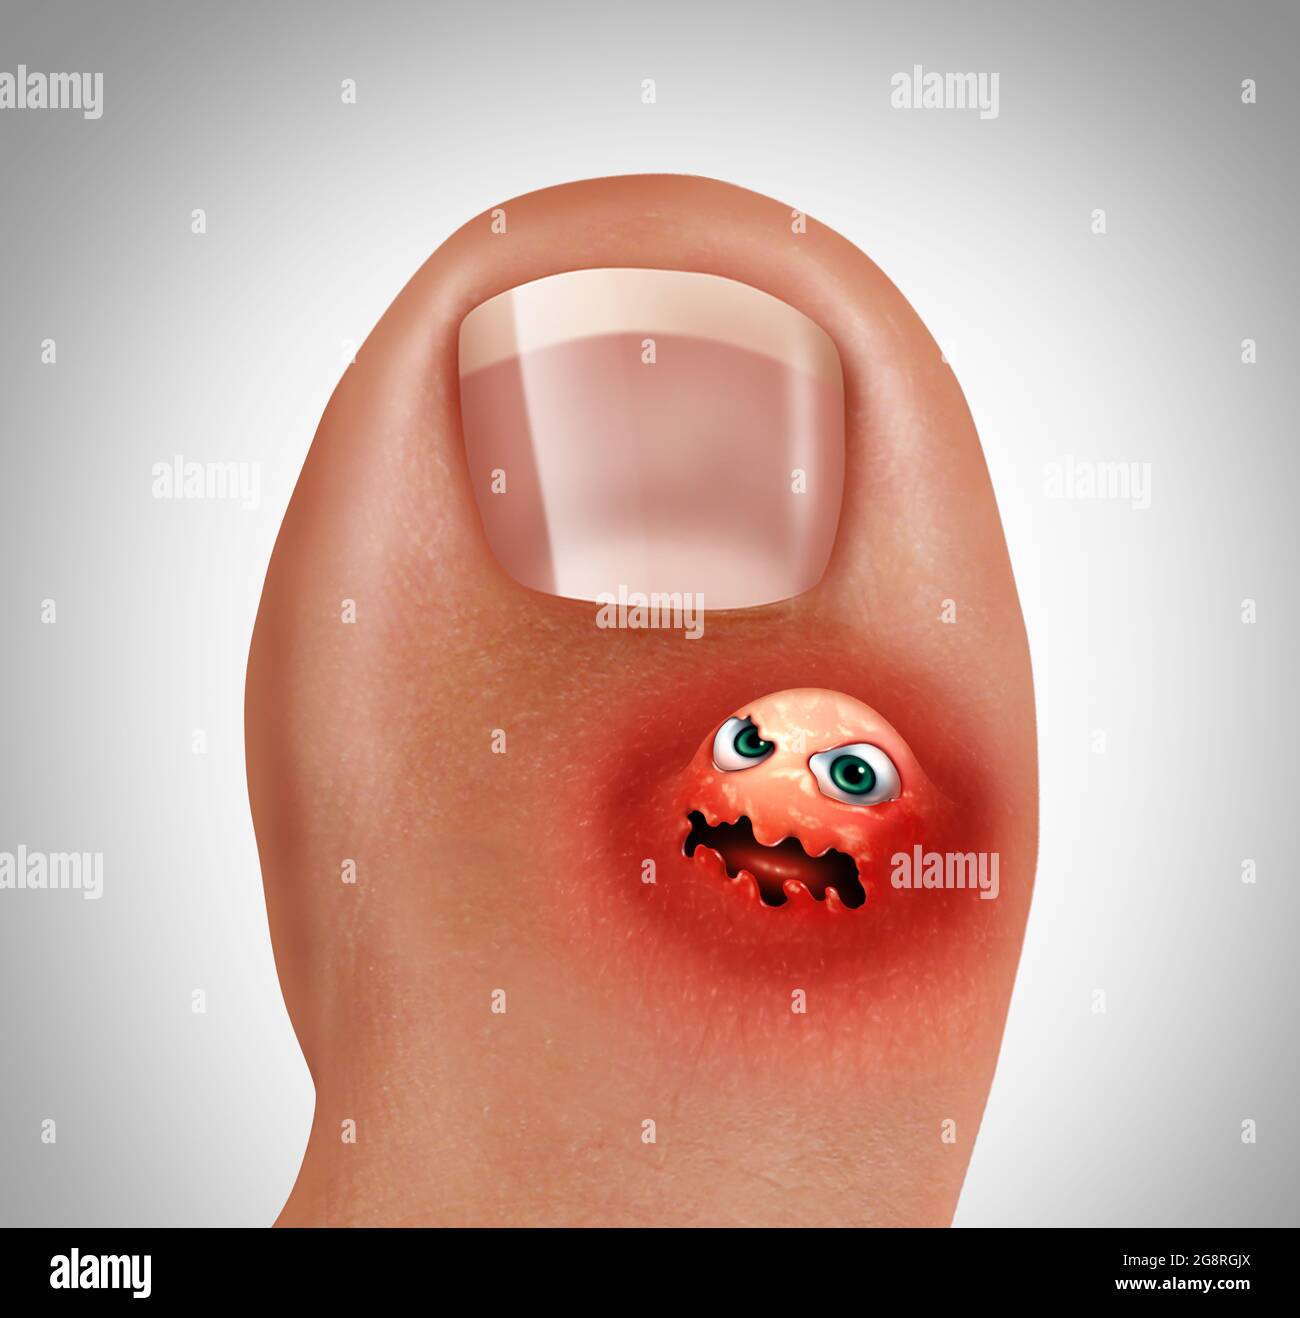 Toe blister or foot wart concept as sore corn or painful feet skin  representing a foot infection or feet injury in a 3D illustration style. Stock Photo